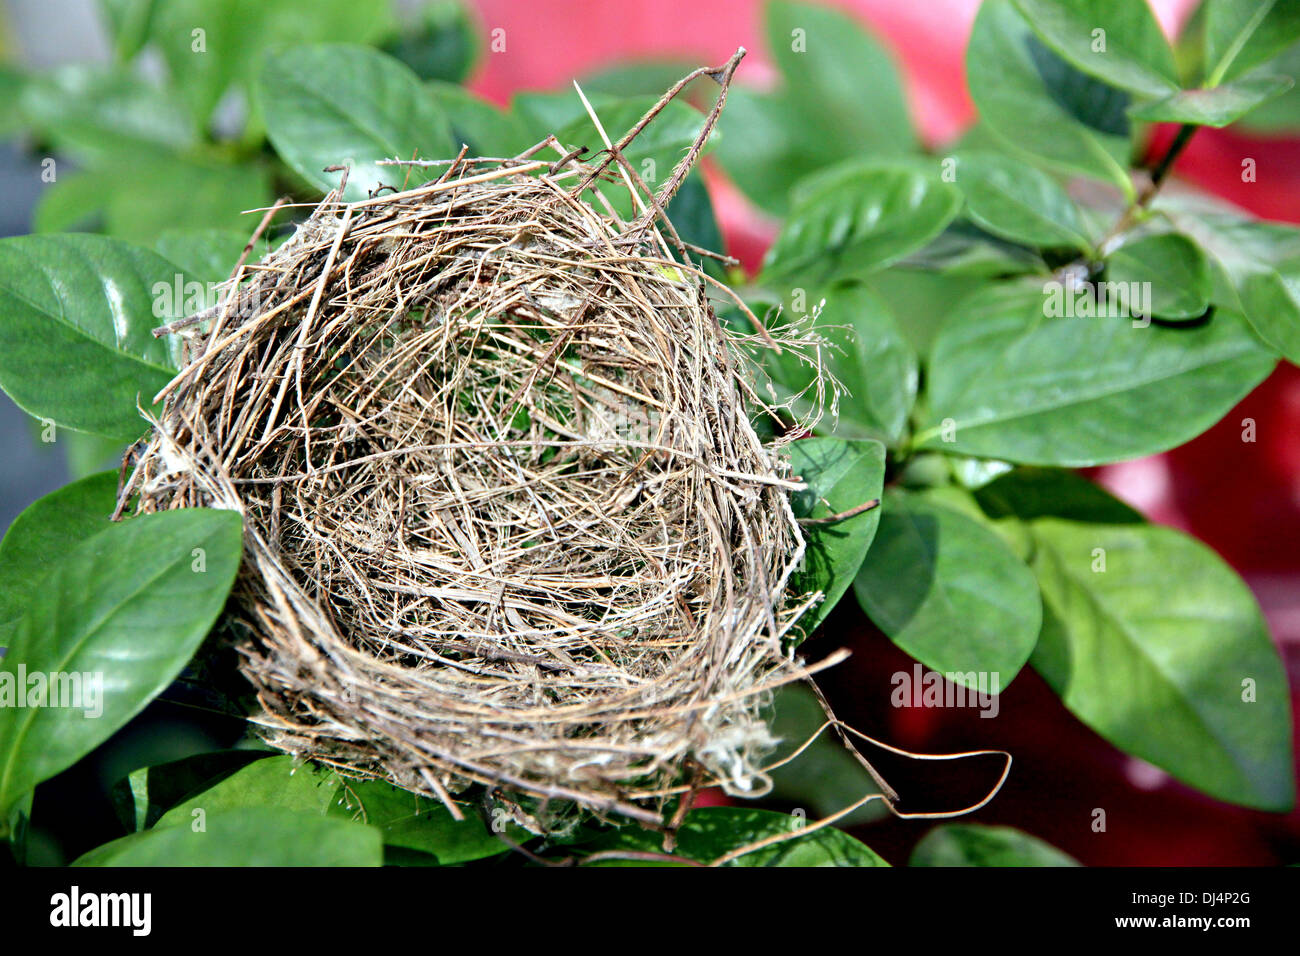 The picture Nests on the leaf in Backyard. Stock Photo